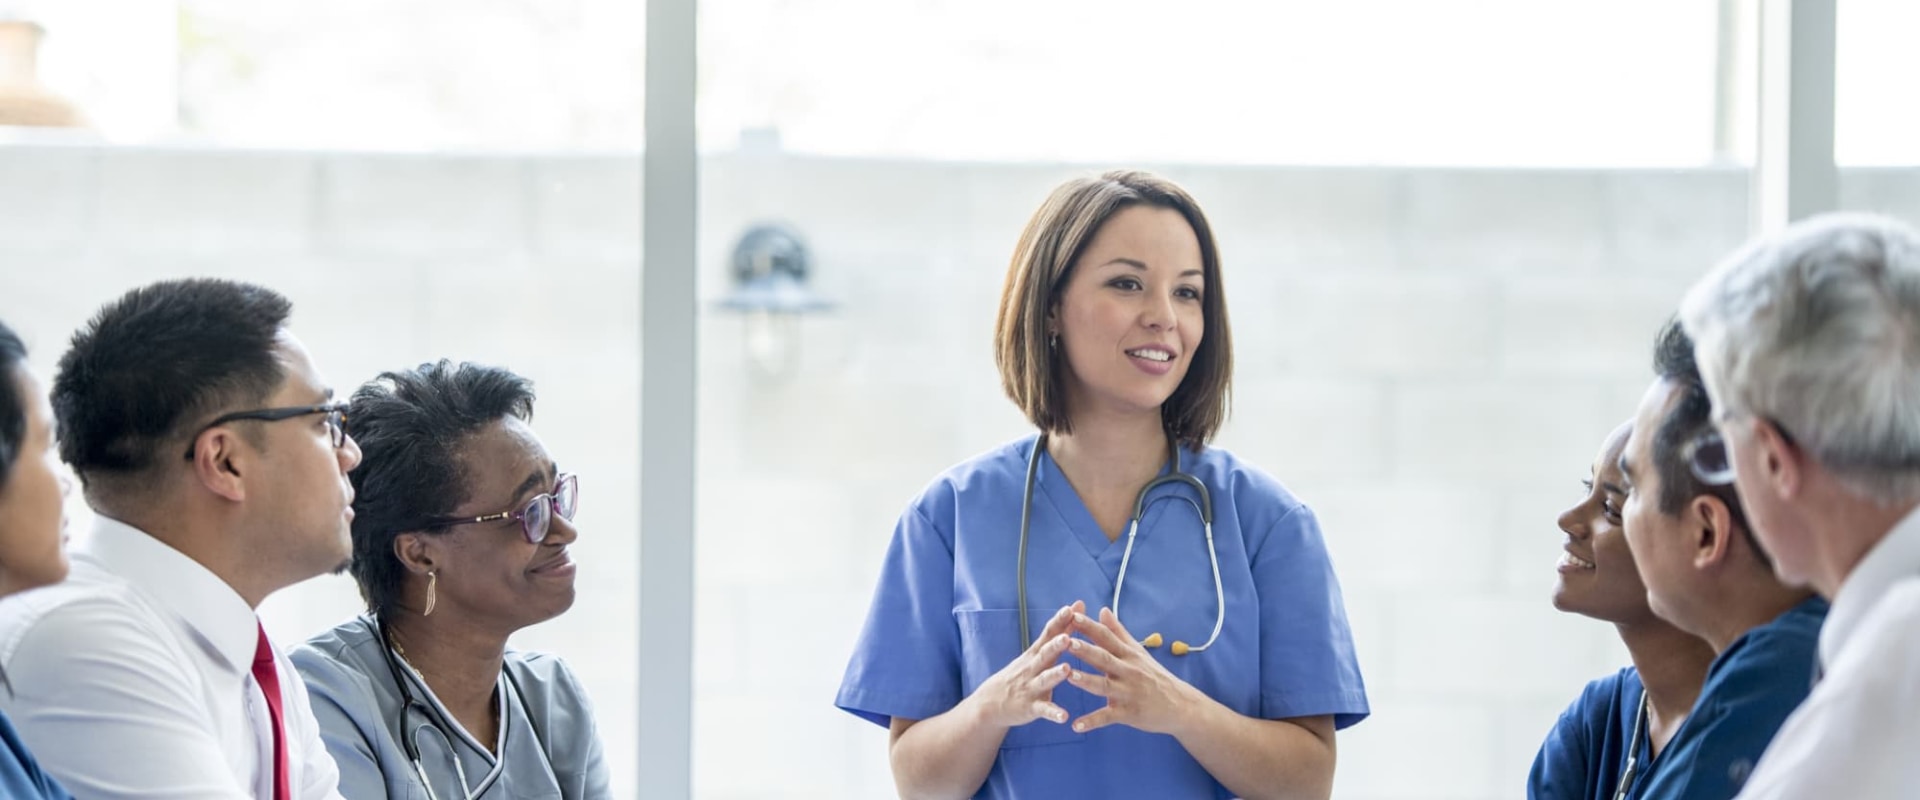 The Benefits of Professional Networking for Medical Professionals